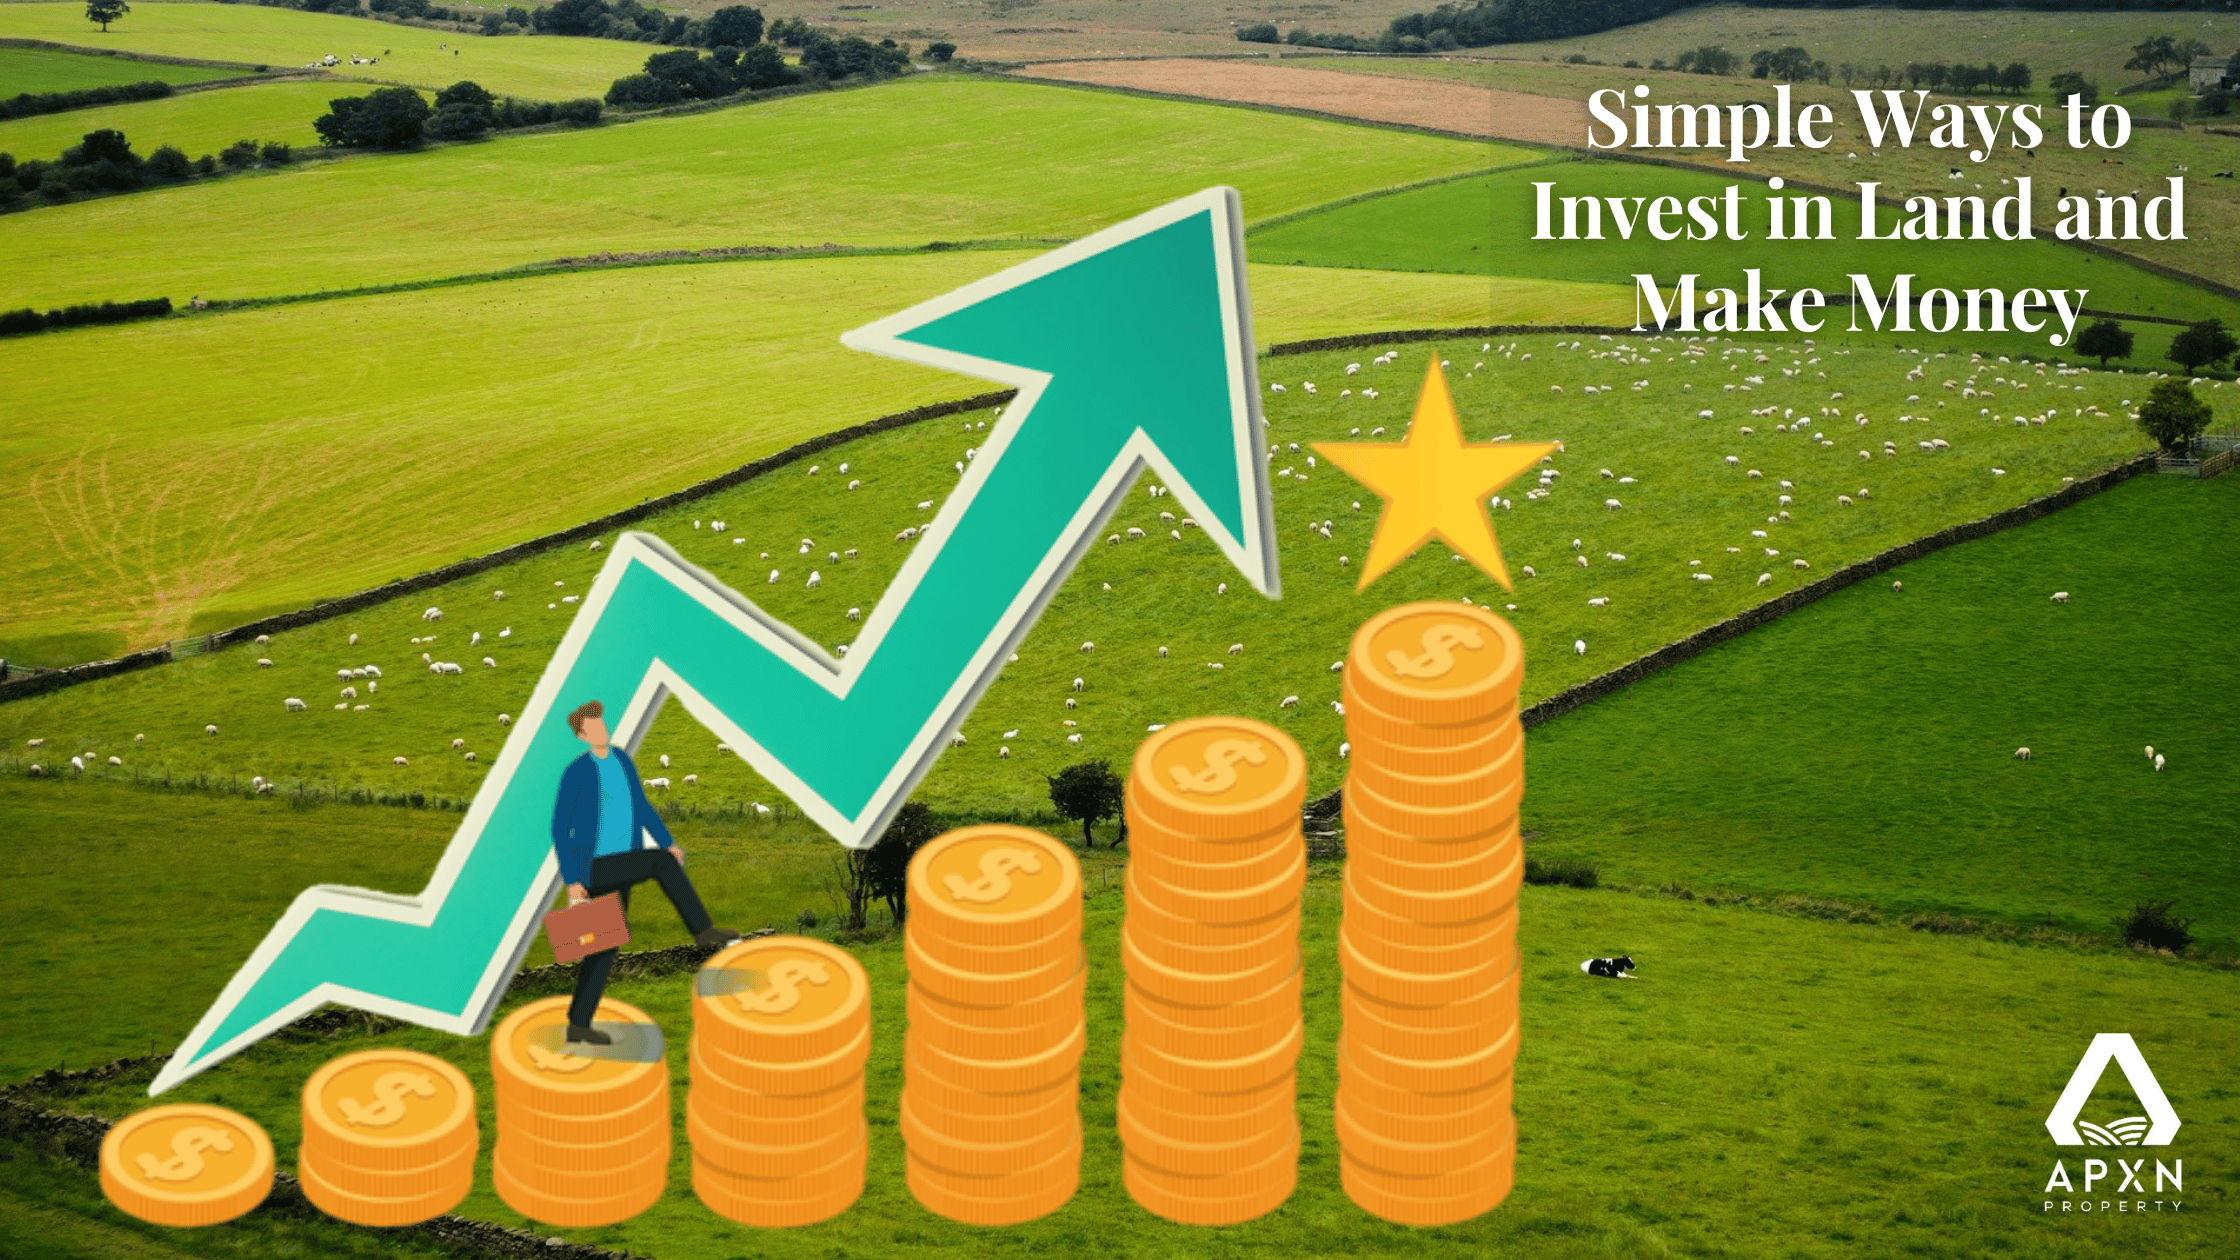 Simple ways to invest in land and make money